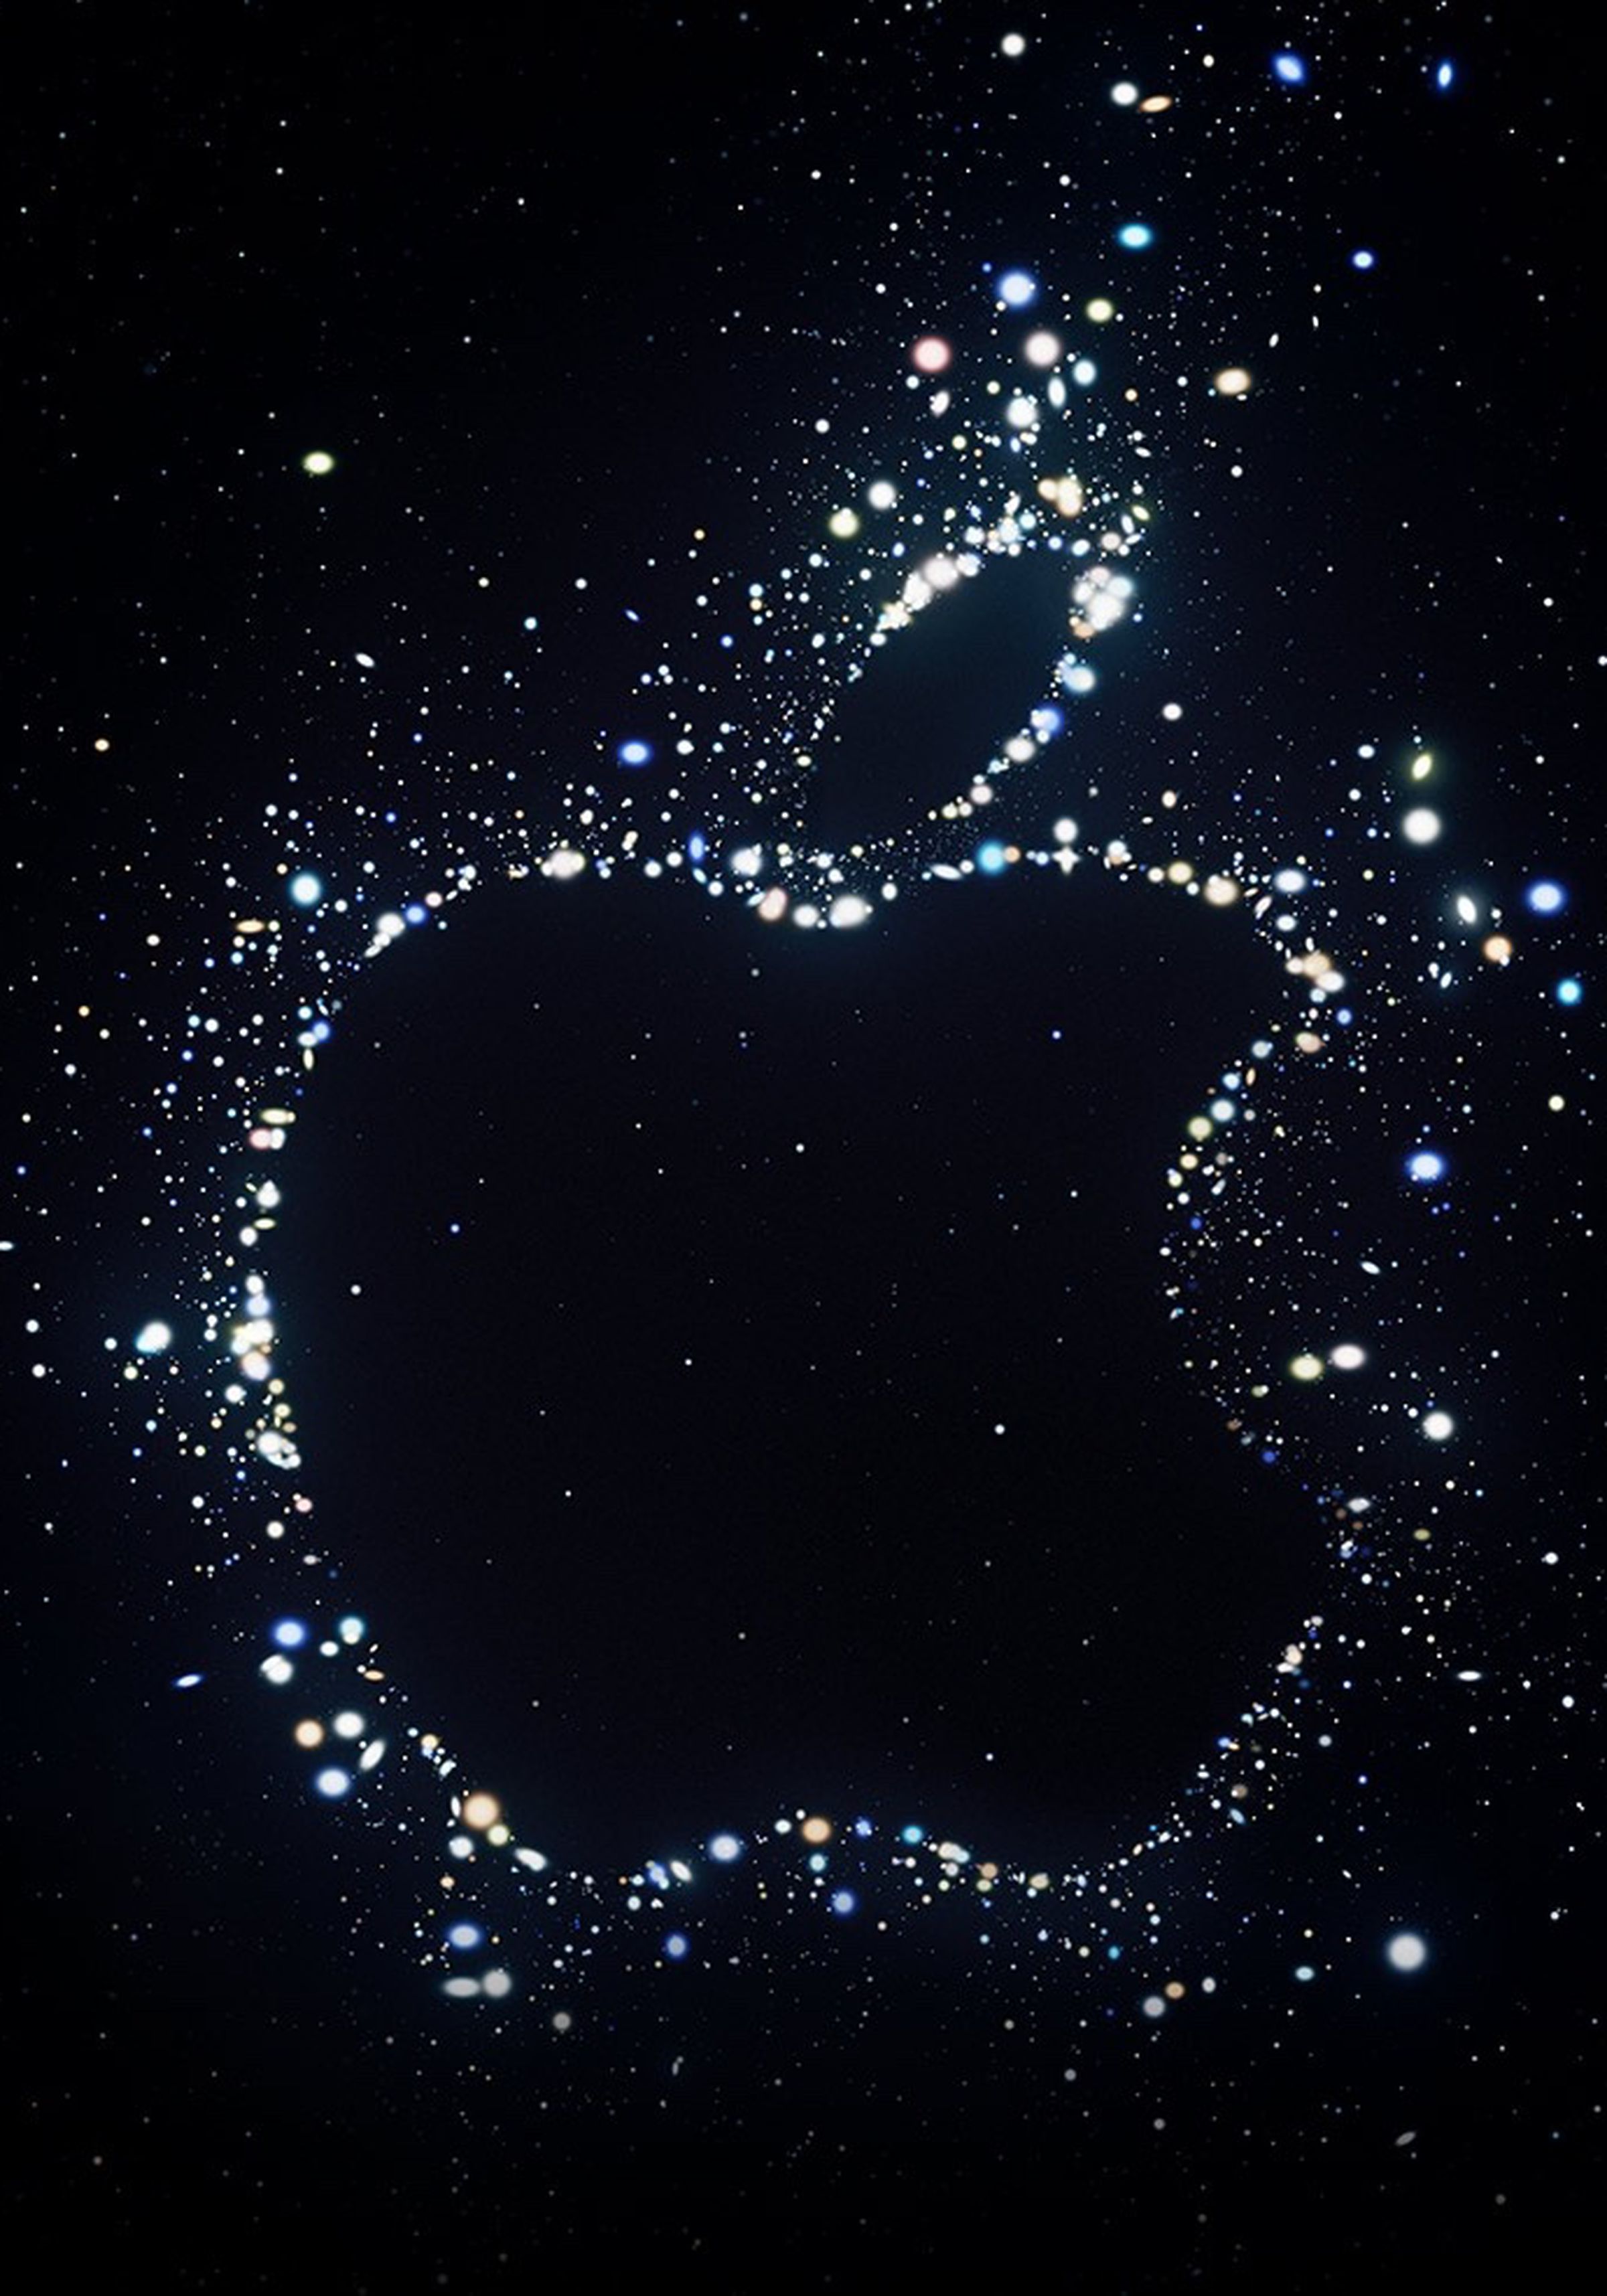 The outline of the Apple logo dotted in lights.